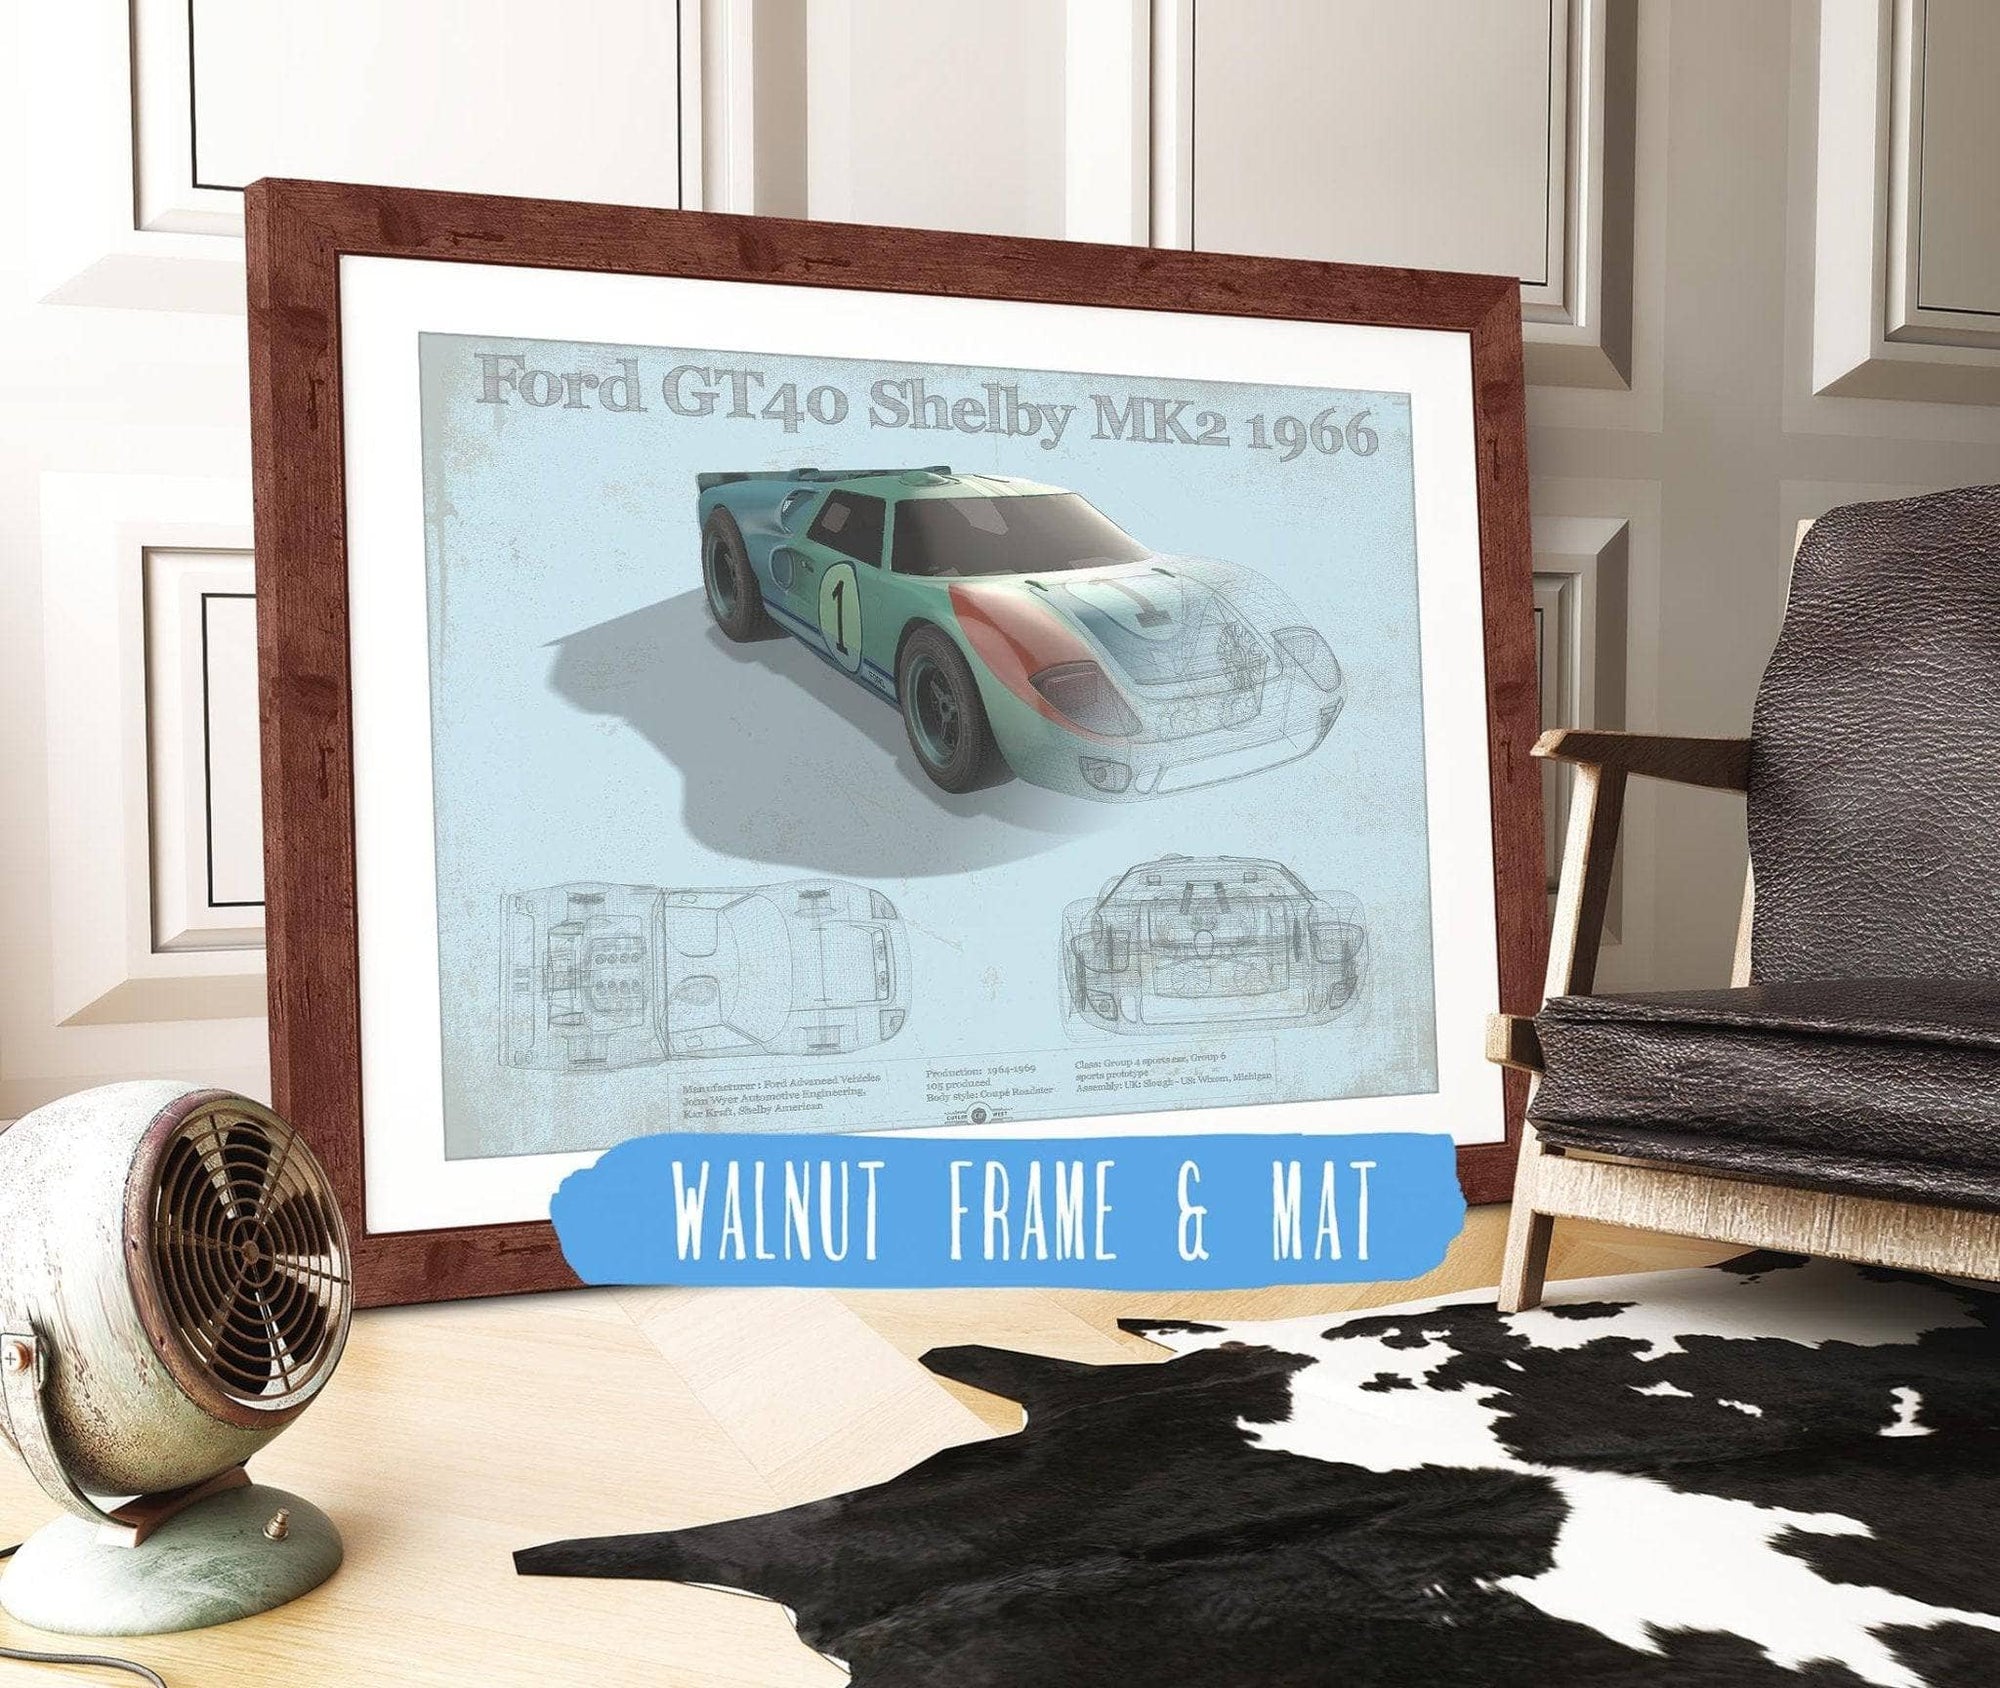 Cutler West Ford Collection 14" x 11" / Walnut Frame & Mat 1966 Ford GT40 Shelby MK2 Sports Car Print 933350121_16032